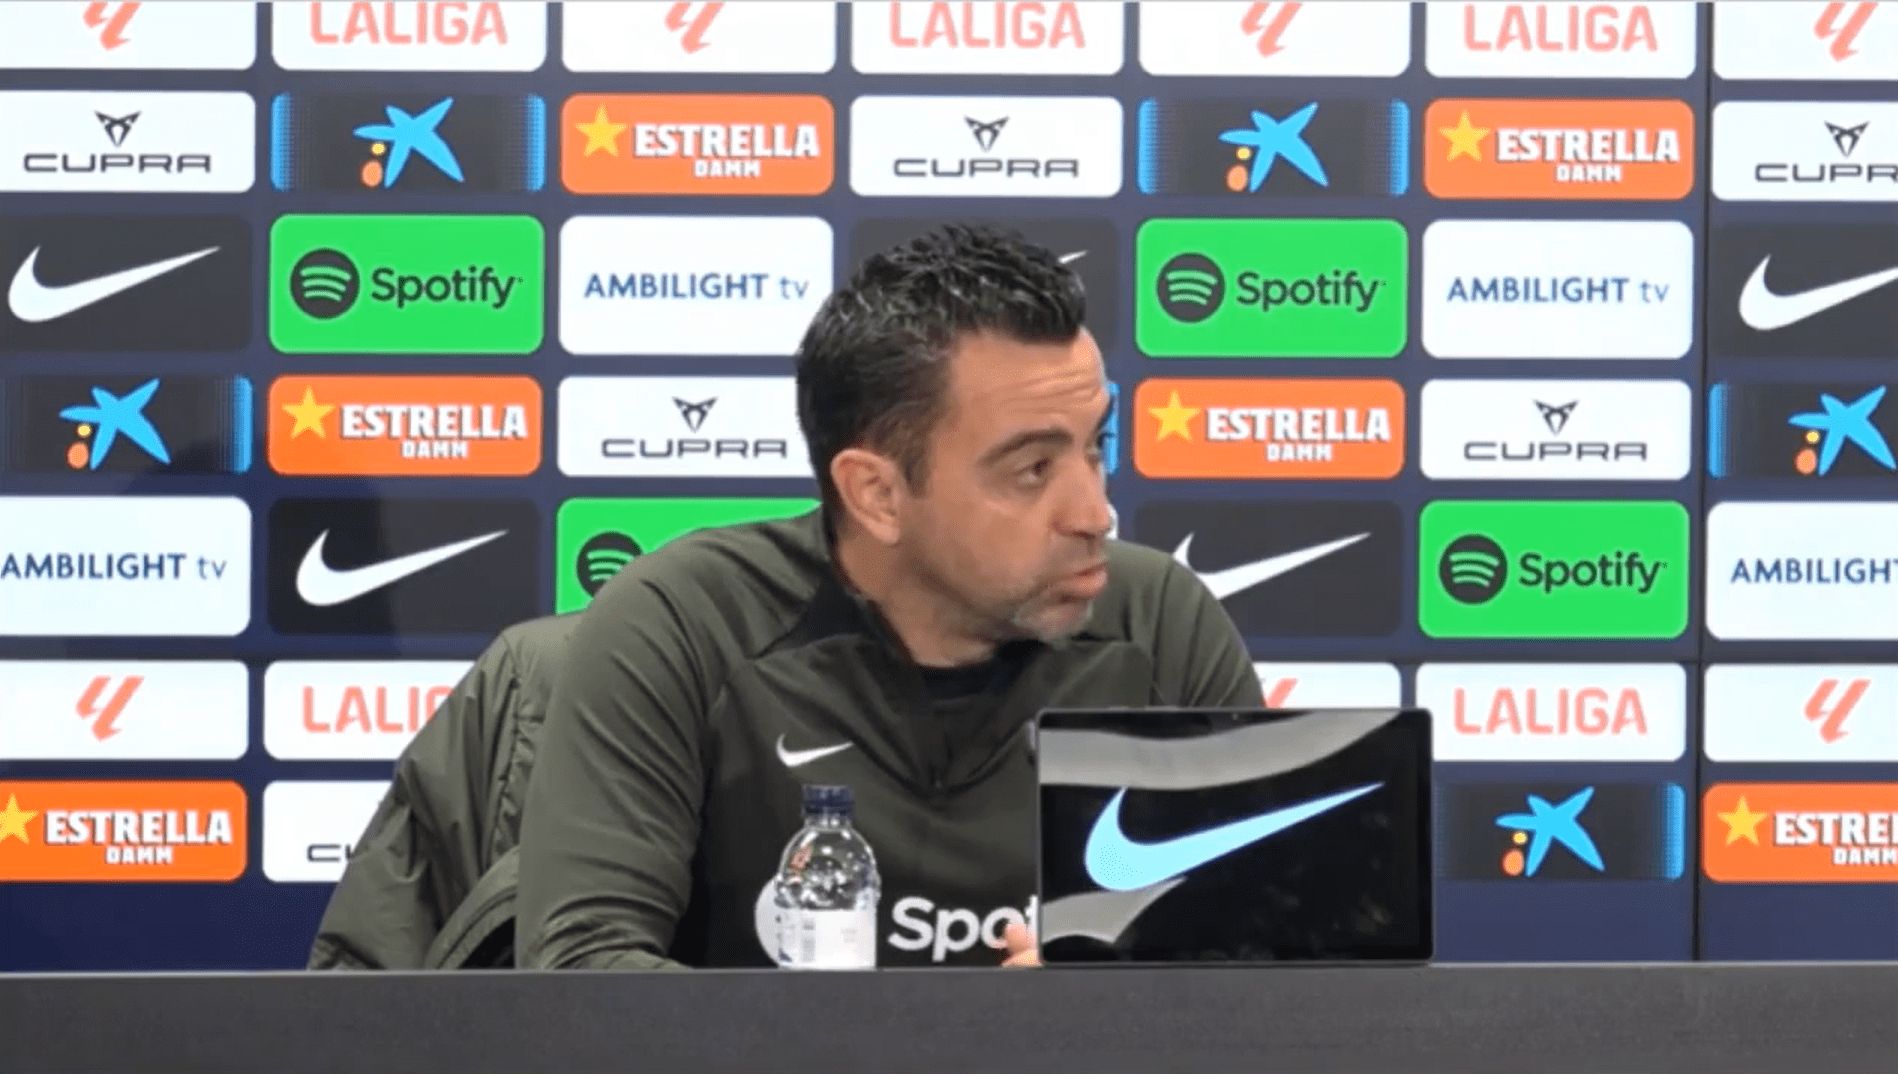 “We haven’t decided” – Xavi Hernandez provides enigmatic answer to questions over Barcelona star’s future